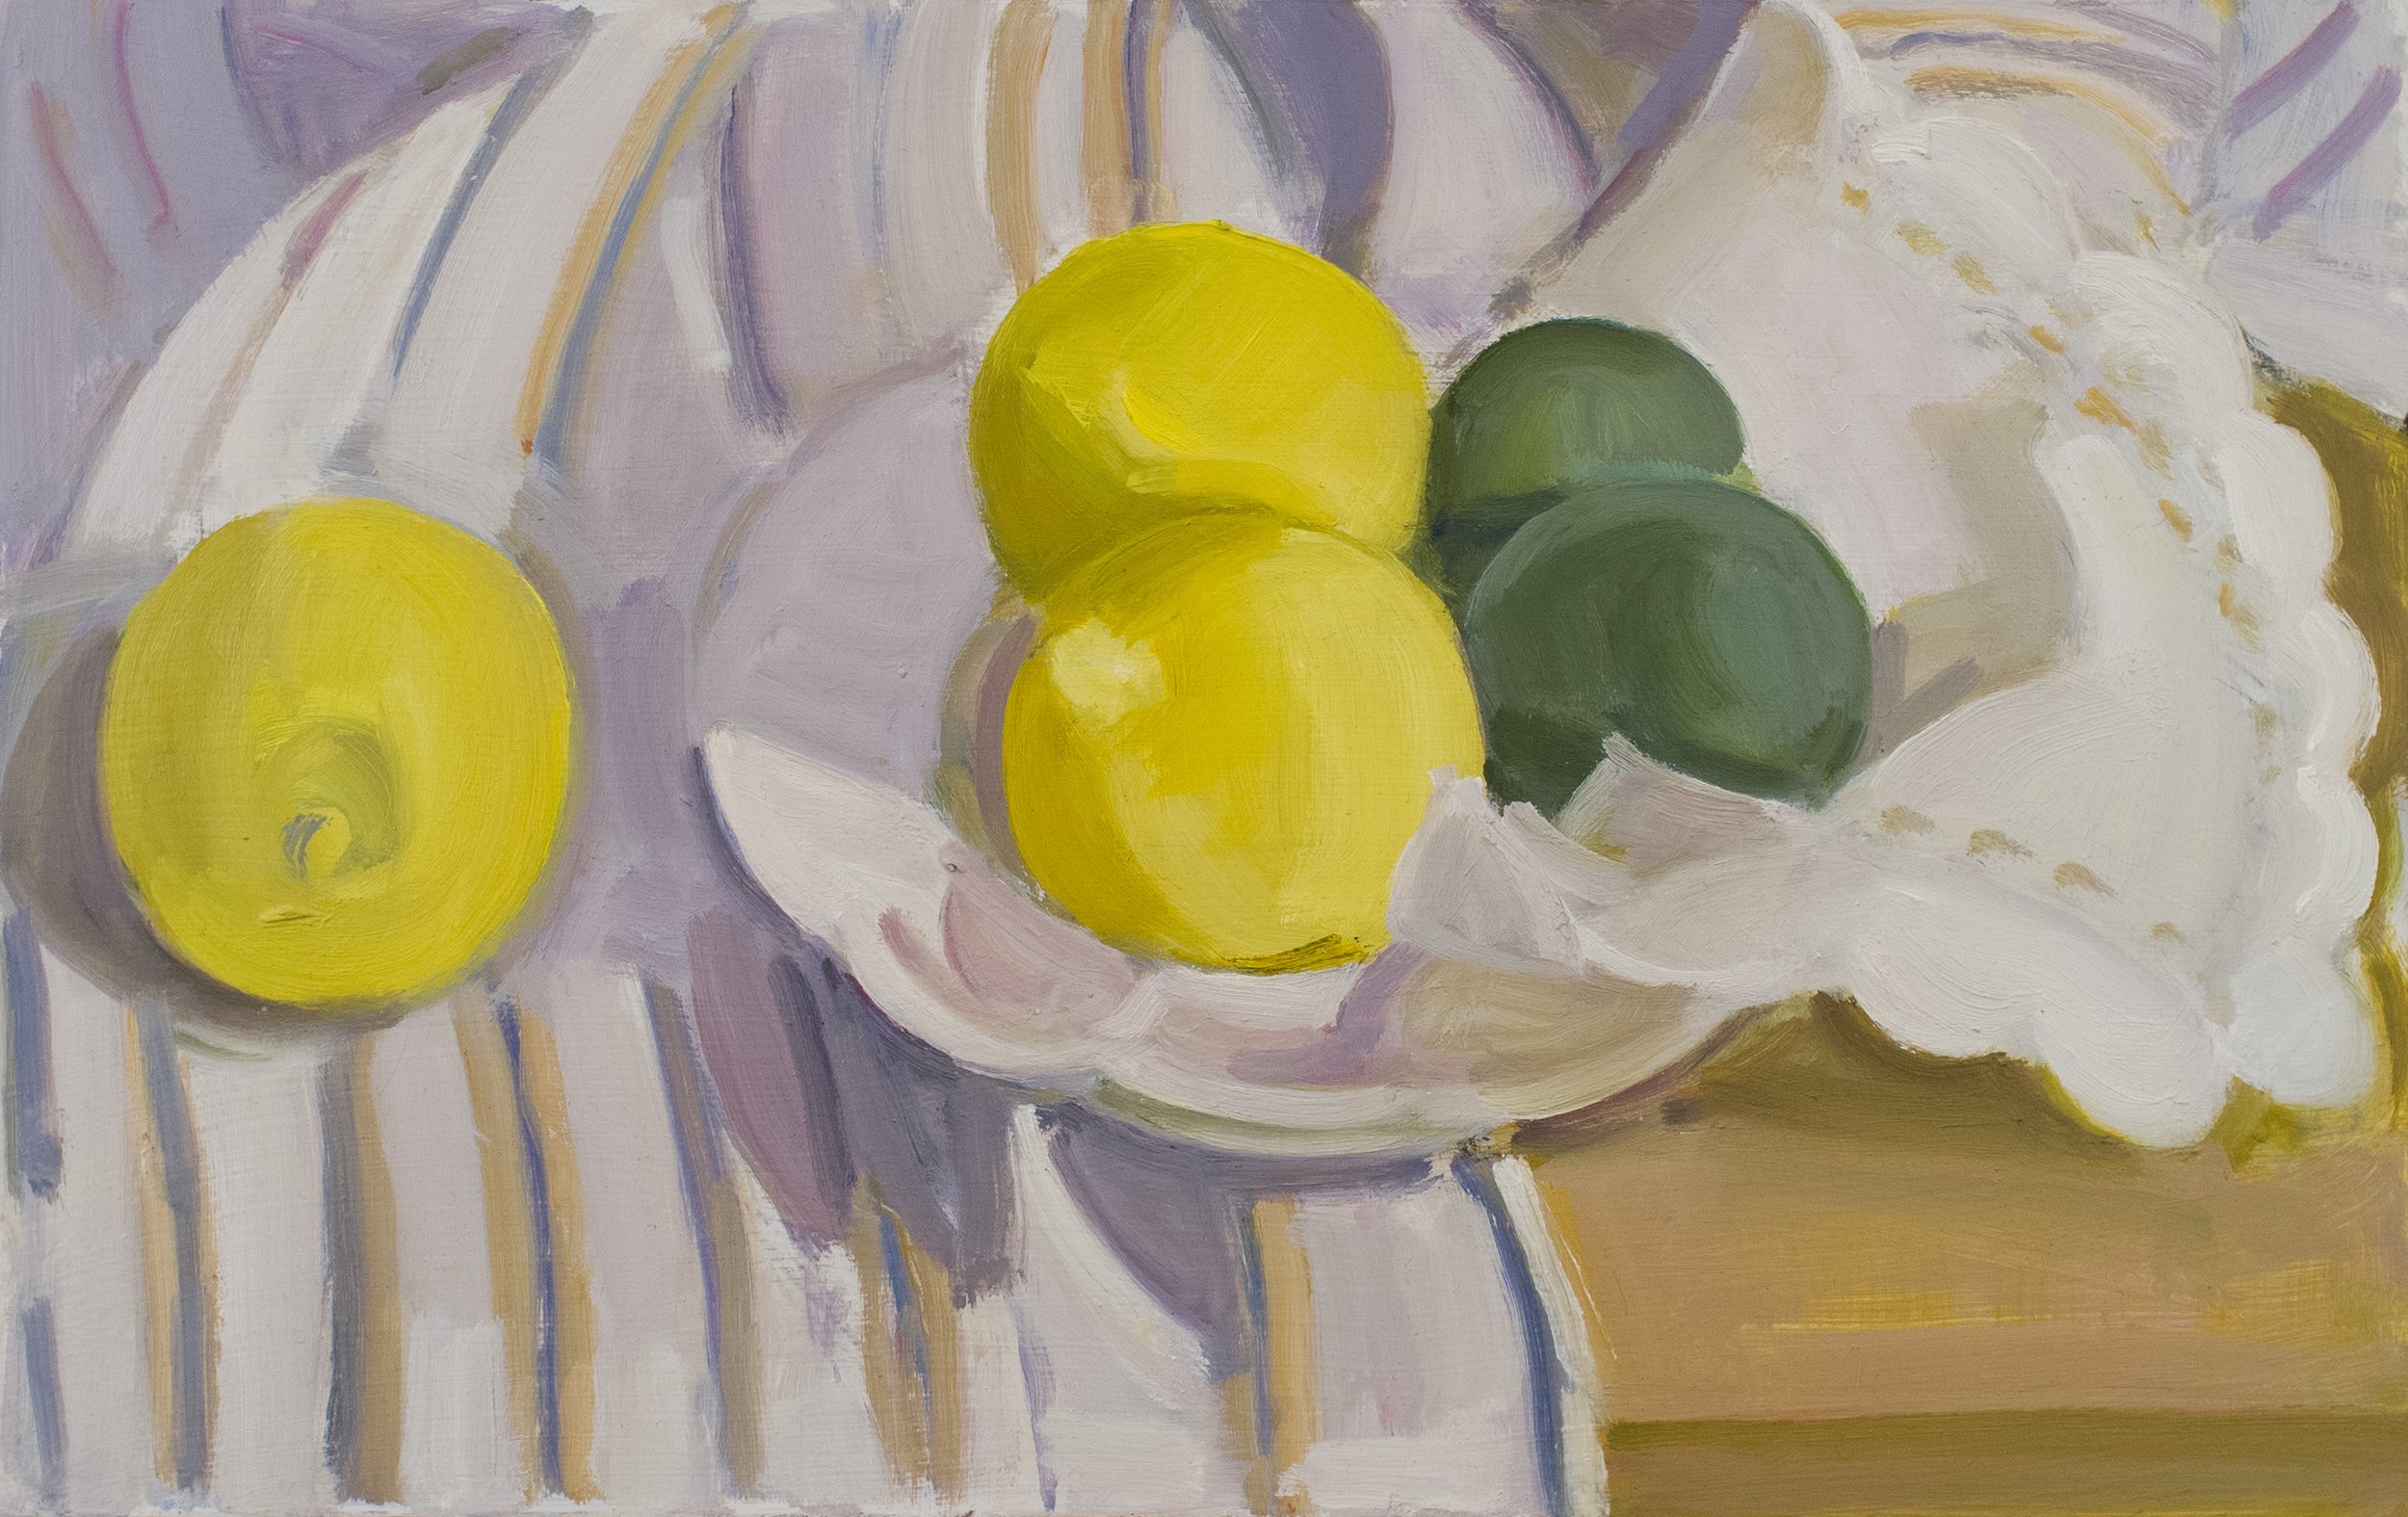   Lemons and Limes with Scalloped Napkin and Striped Cloth , 2019, oil/panel, 8 x 13 in. (Private collection) 